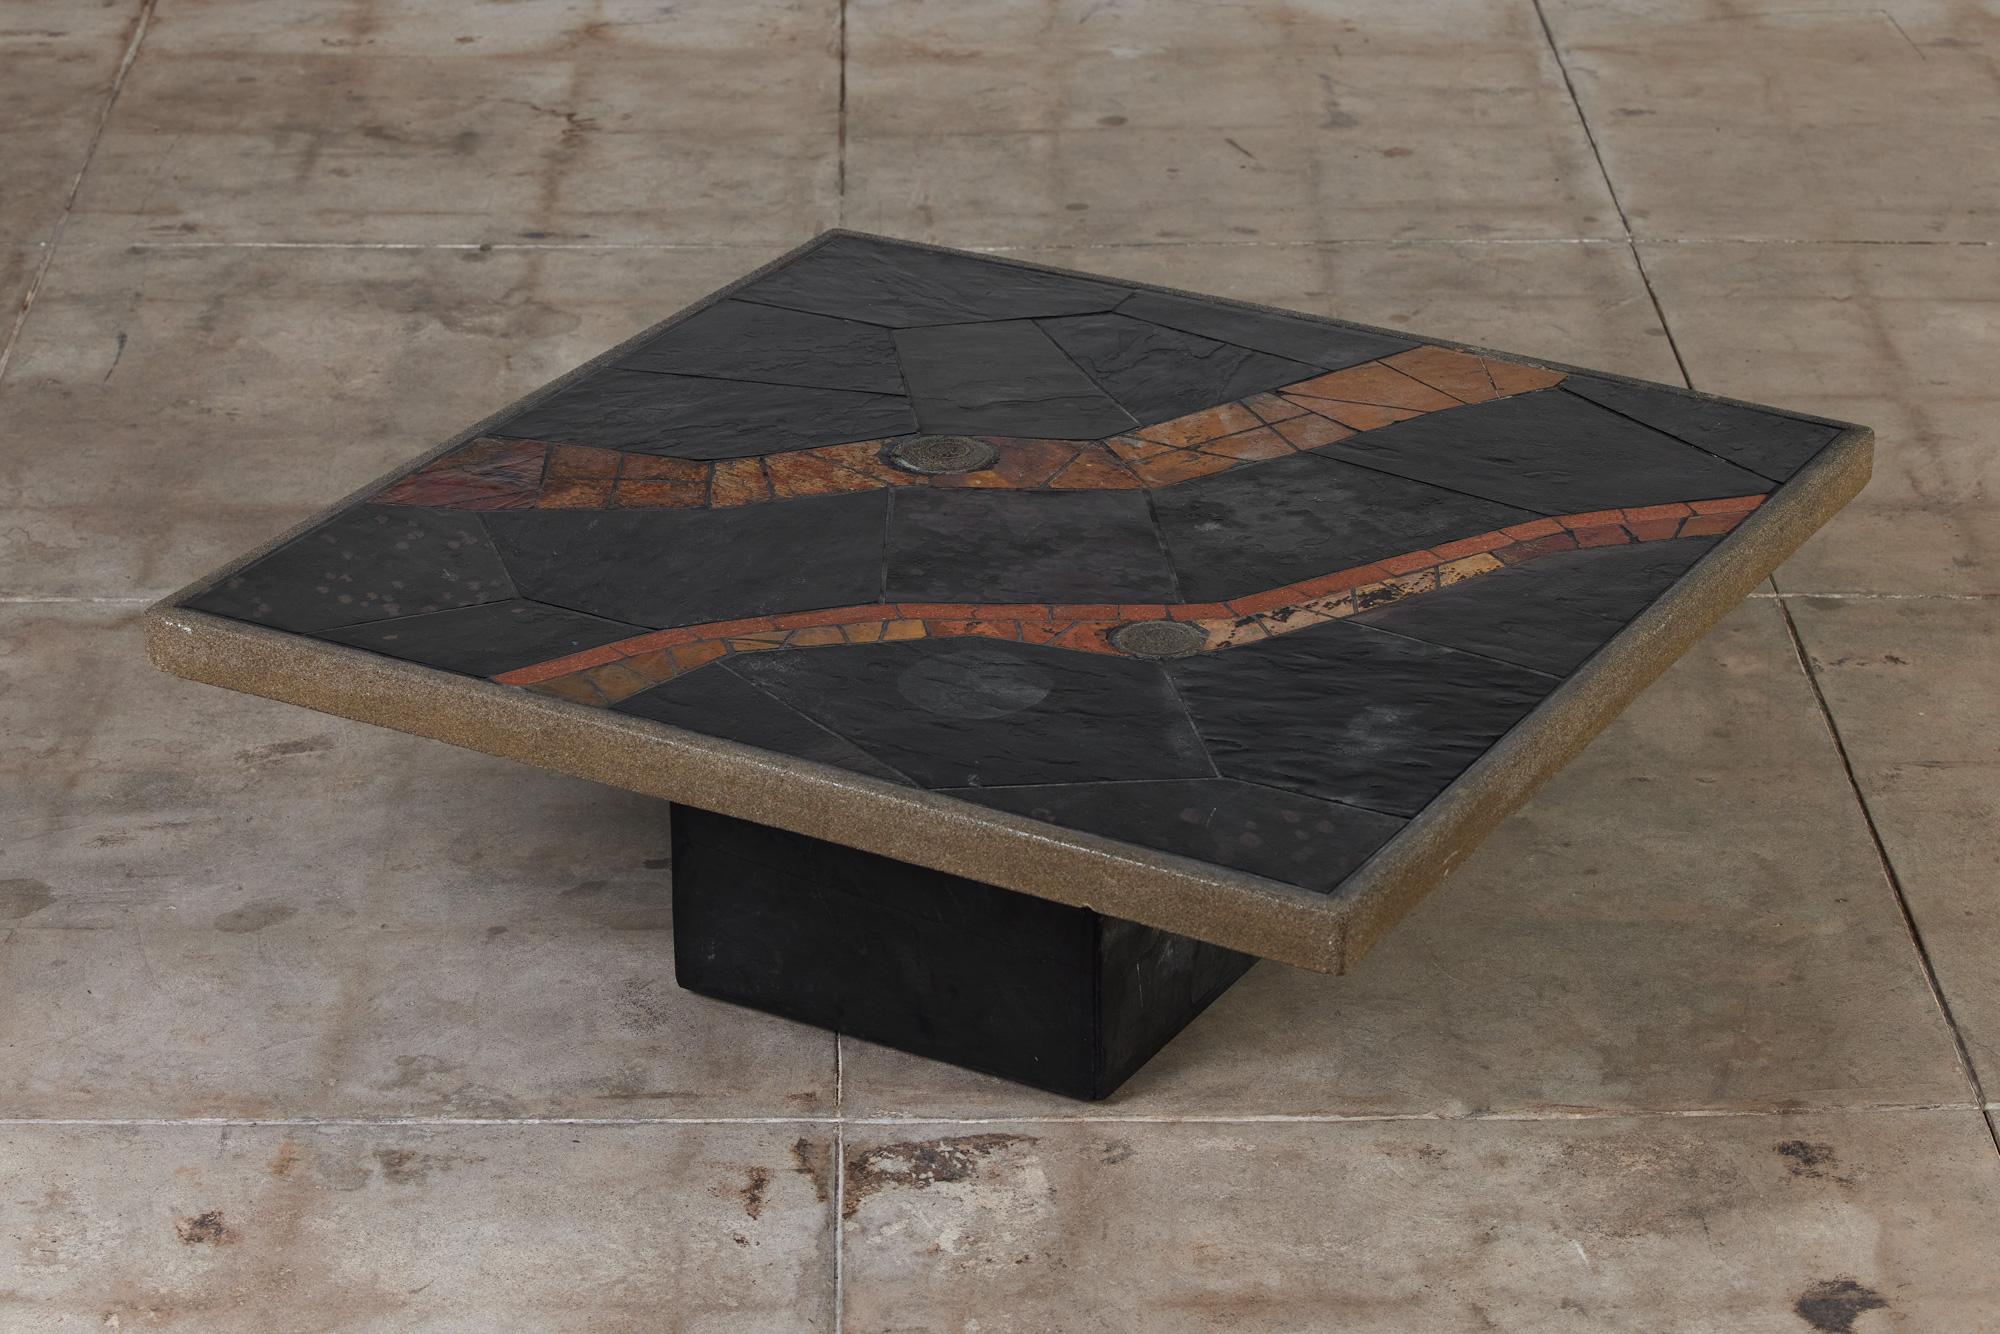 This brutalist coffee table by Paul Kingma, c.1980s, Netherlands, is truly one of a kind. Kingma's designs were often inspired by natural stone elements. Each of his carefully crafted, one of a kind designs, encapsulated his love for mosaic art and